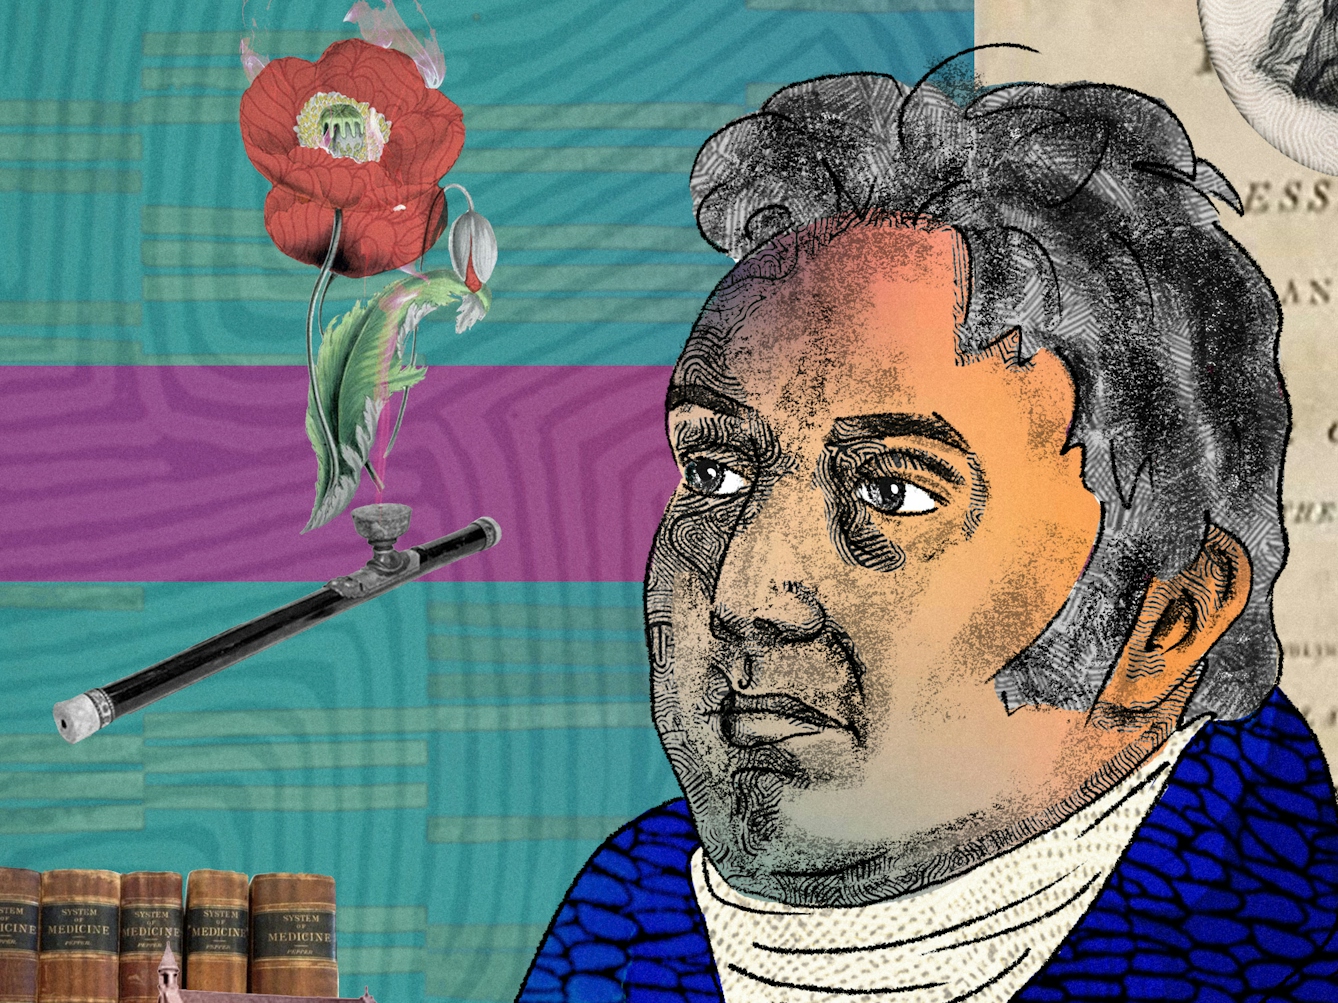 A detail from a larger abstract digital illustration featuring two head and shoulders portraits of two males posed back to back, depicting the writer philosopher Samuel Taylor Coleridge on the left and chemist Humphry Davy on the right. On the left side by Coleridge there is a romantic image of a red poppy flower as well as an opium pipe. To the right side by Davy there is an archive image of someone inhaling pain relief gas as part of a medical procedure. 